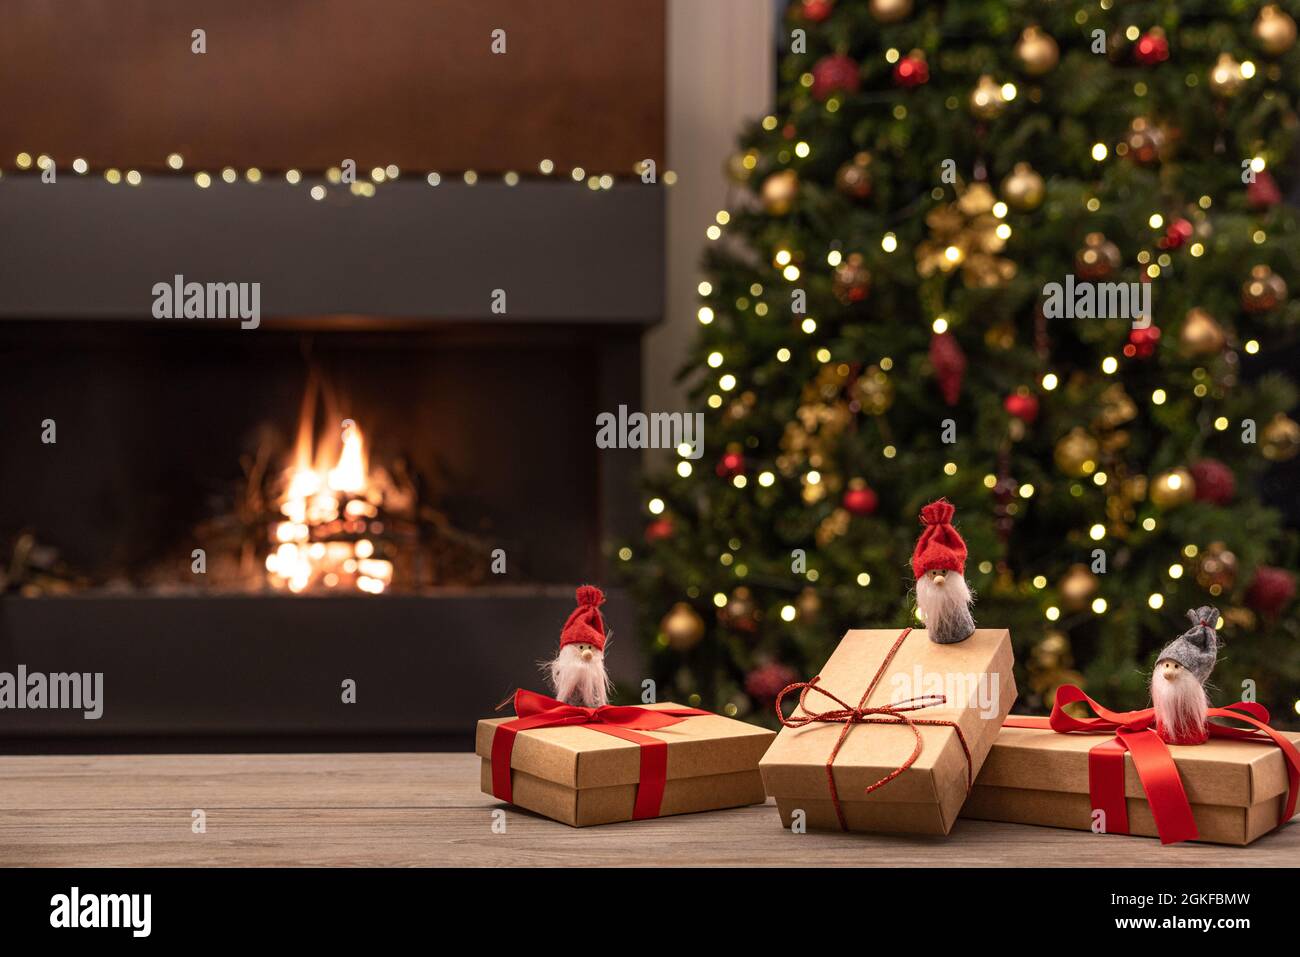 Cozy Christmas atmosphere with Christmas gnomes and gifts on wooden table in the foreground. In the background blurred the fireplace with fire, the Ch Stock Photo